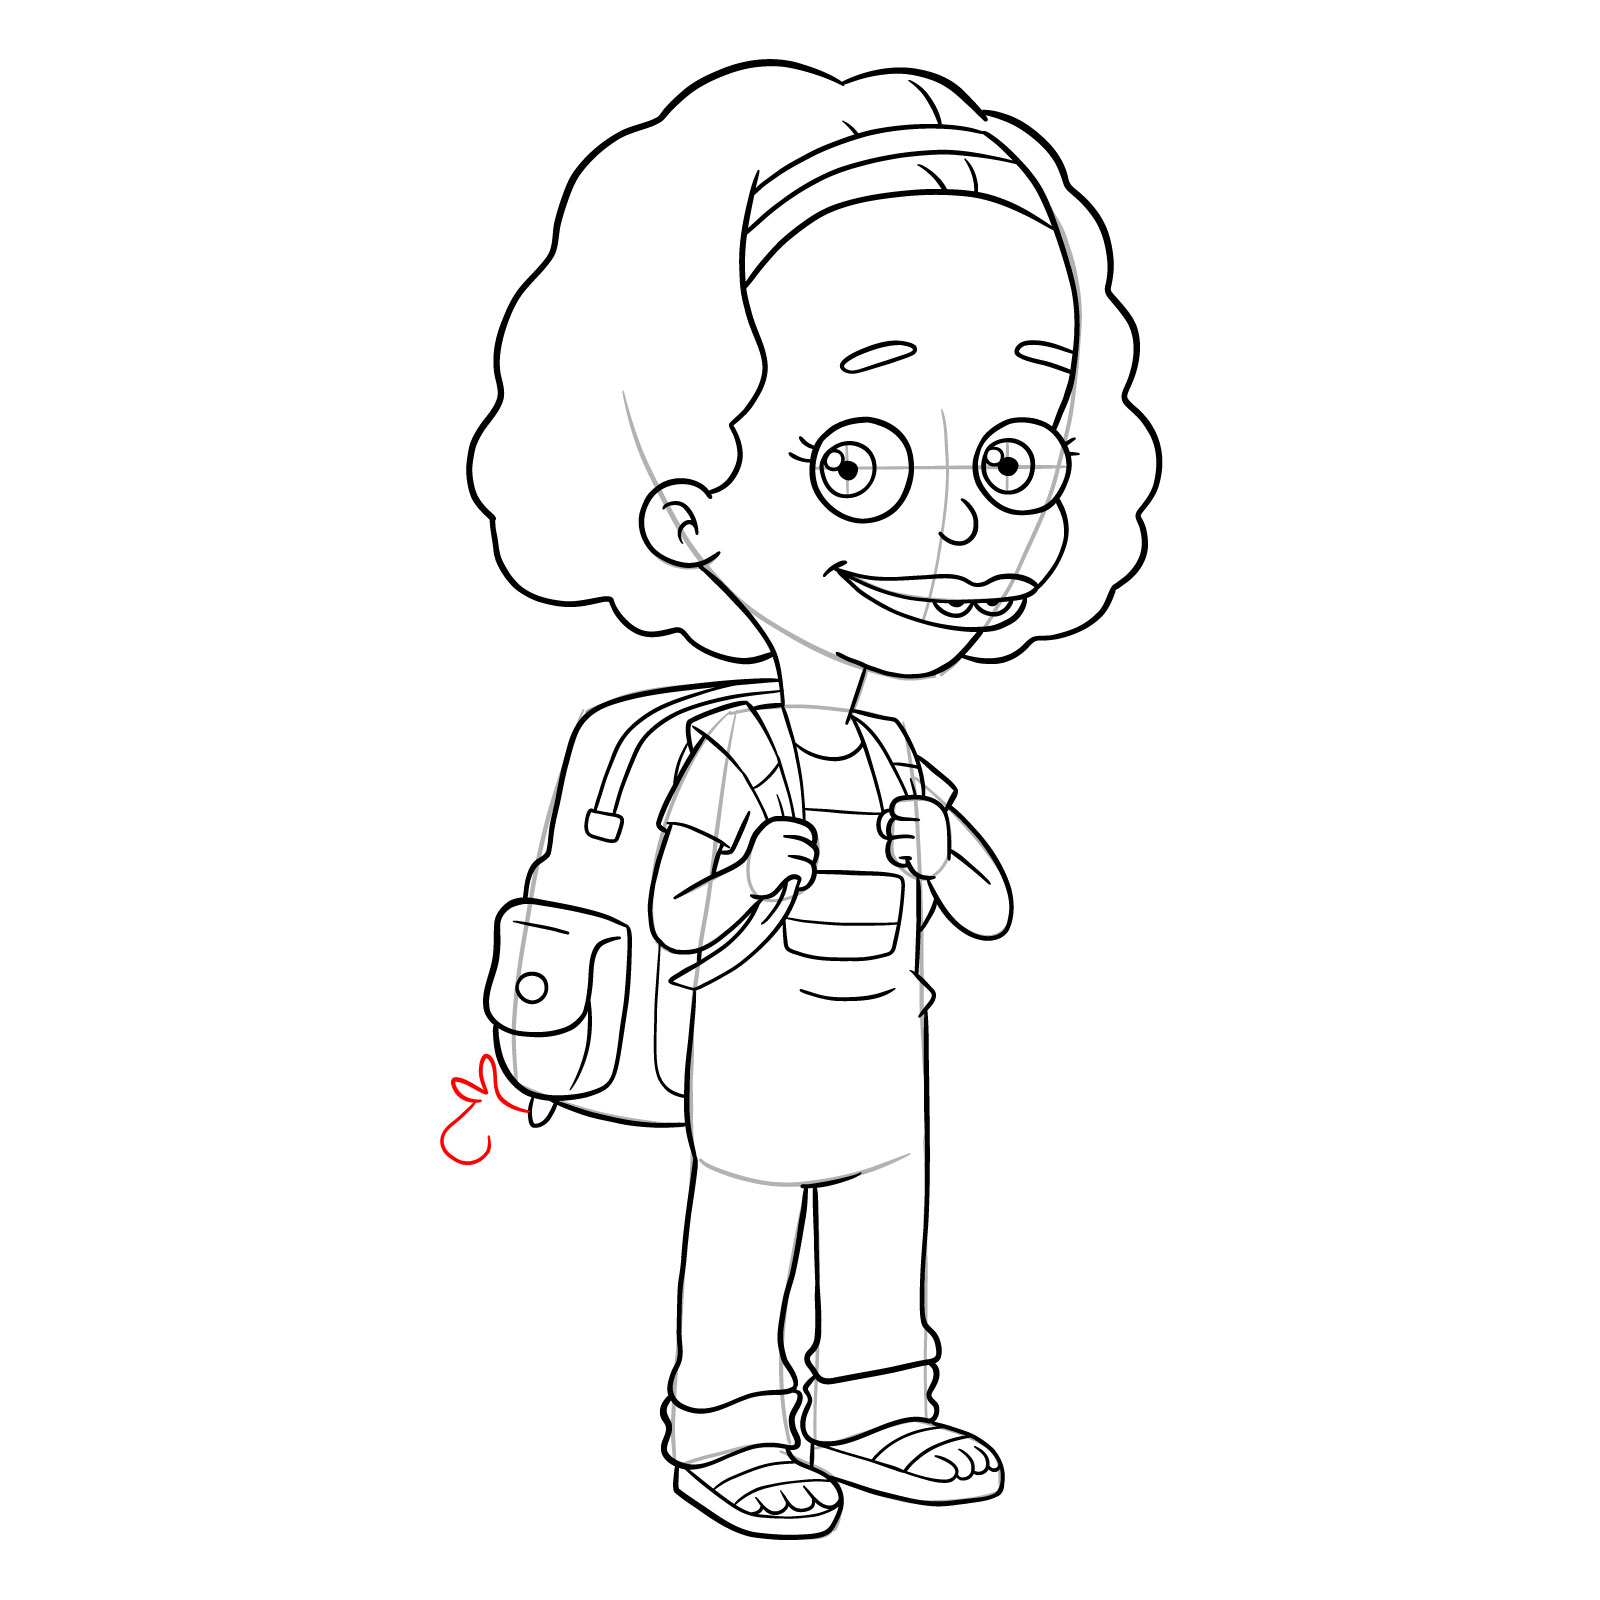 How to draw Missy from Big Mouth - step 33